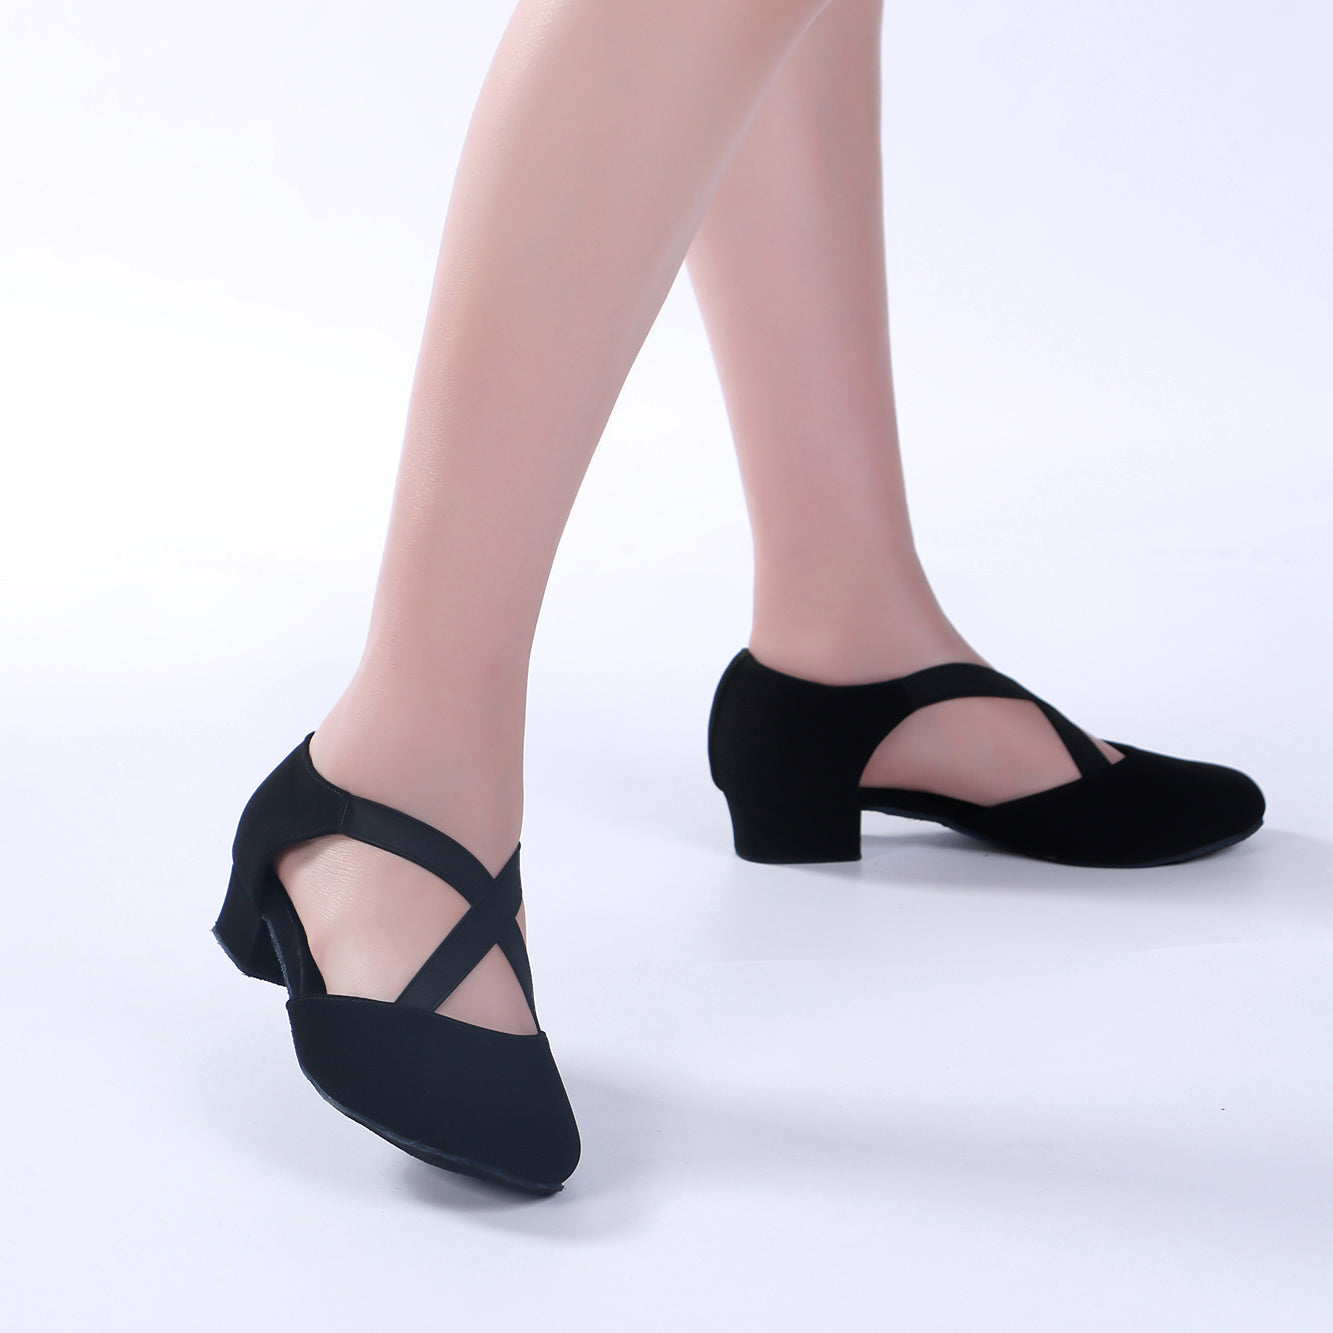 Ladies black low heel ballroom dancing shoes with suede sole for tango latin practice, closed-toe design (PD7307B)7